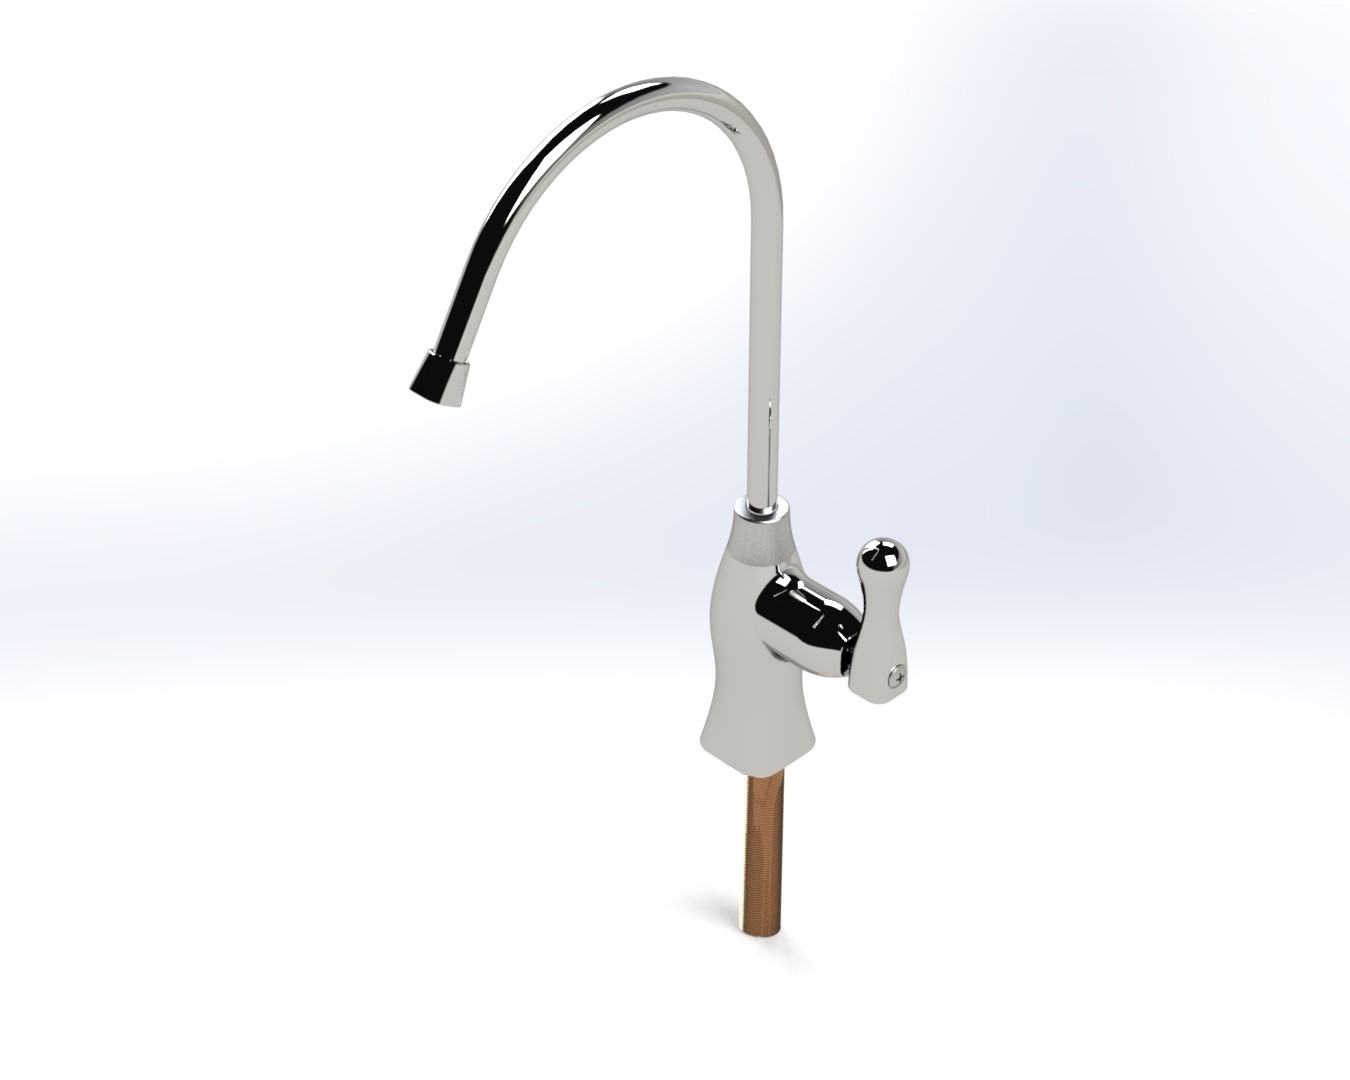 Drinking Water Filtration Faucet With Single Lever Handle